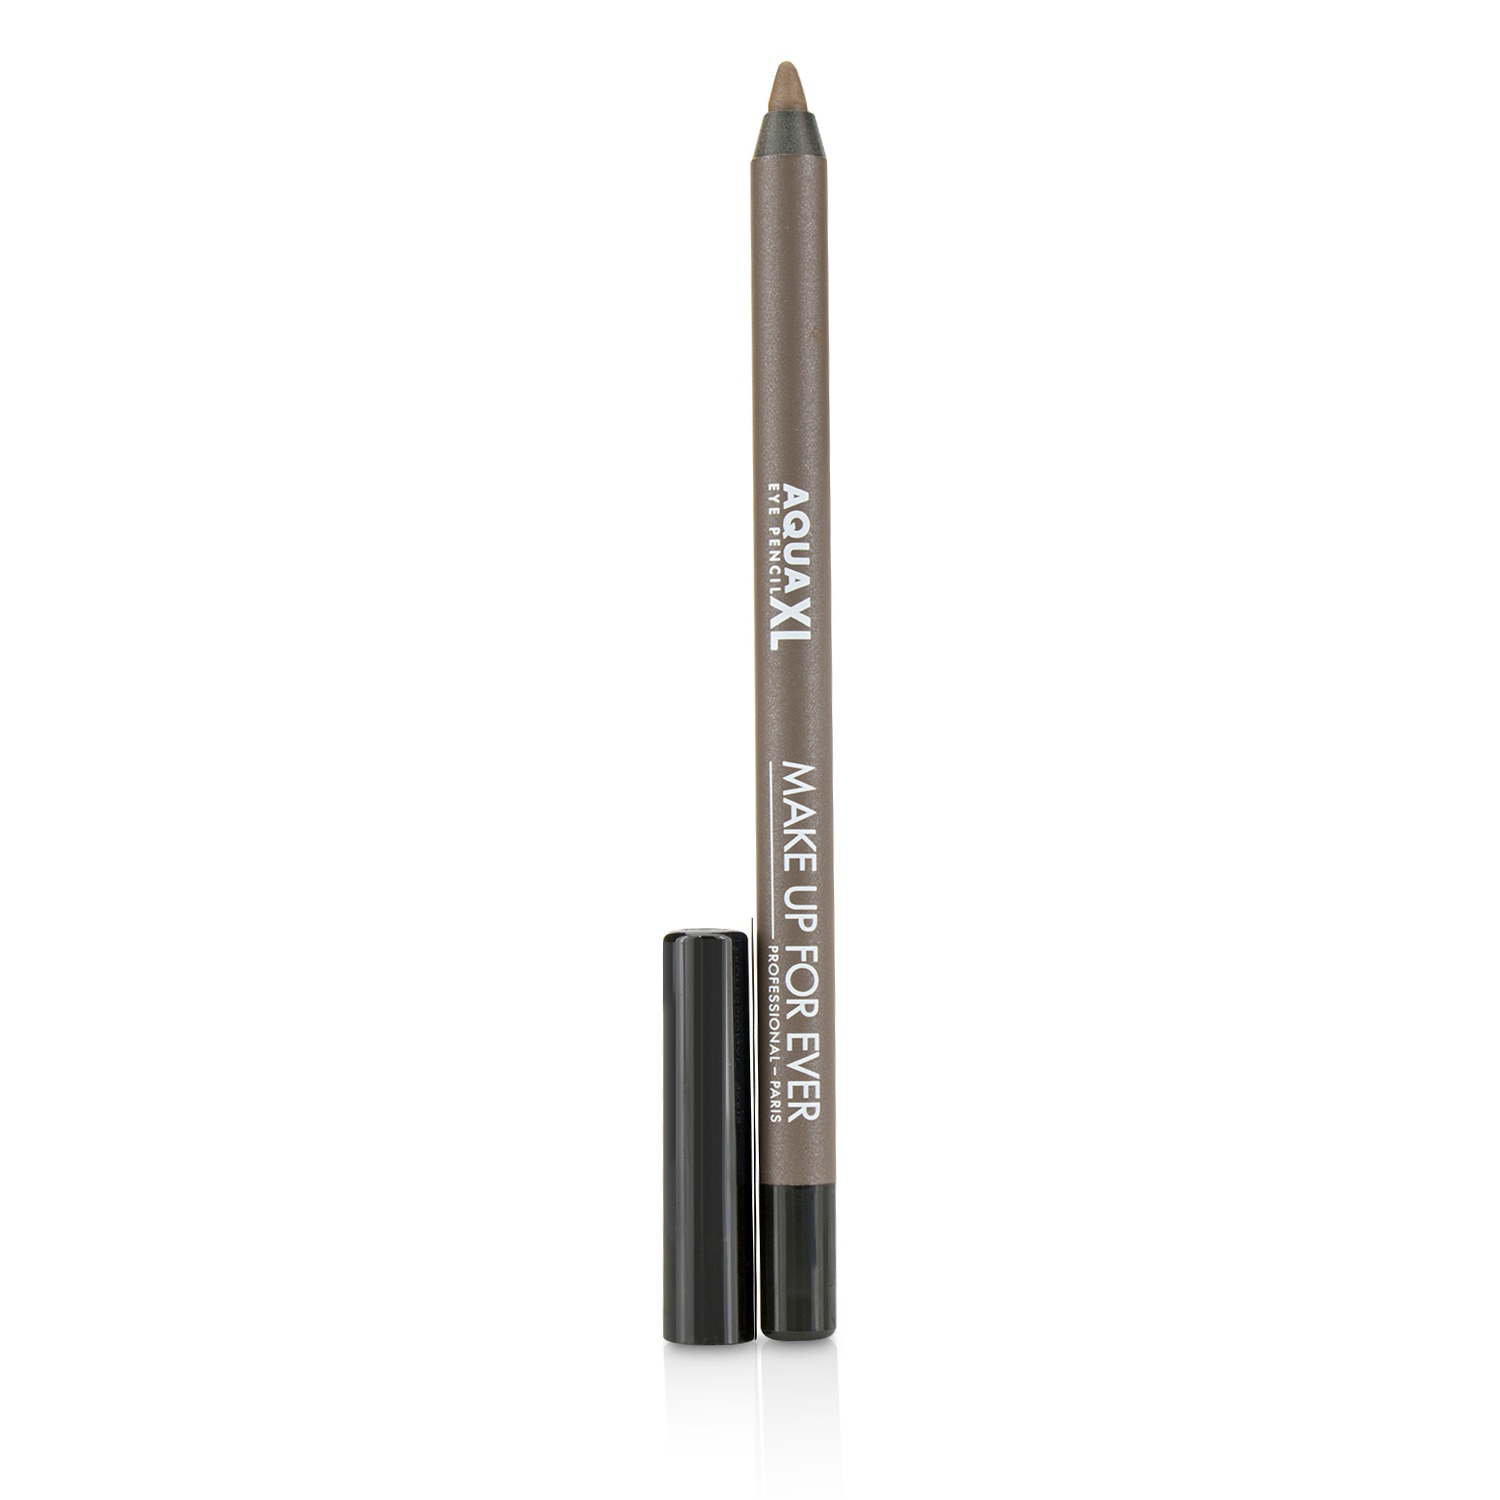 Aqua XL Extra Long Lasting Waterproof Eye Pencil - # S-50 (Satiny Taupe) Make Up For Ever Image